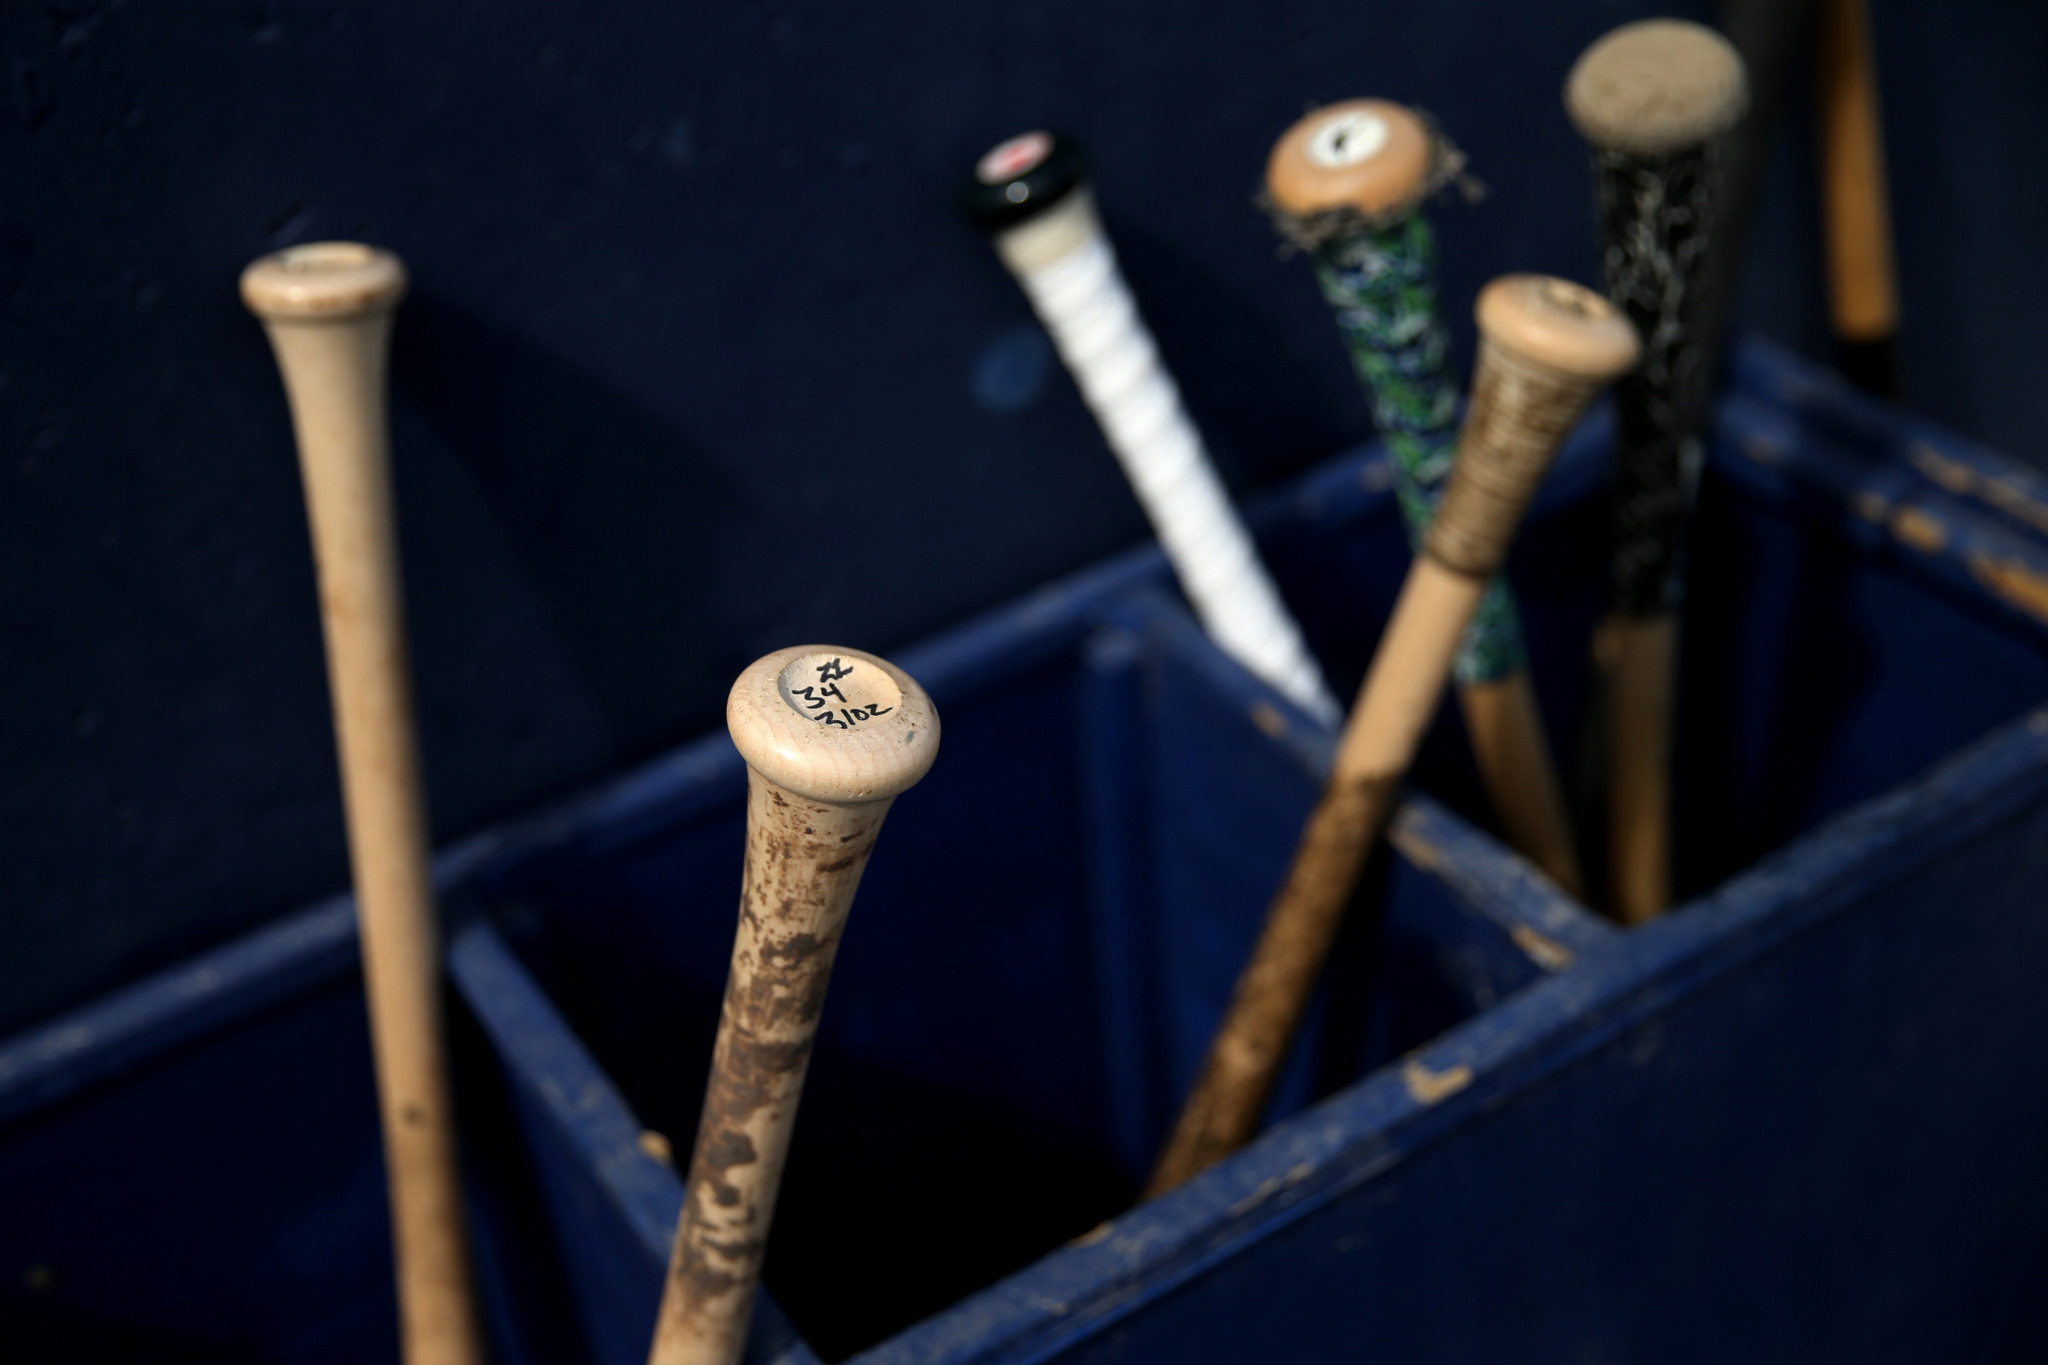 To be approved, the bats must be made of one solid piece of wood from the handle to the top ©Getty Images